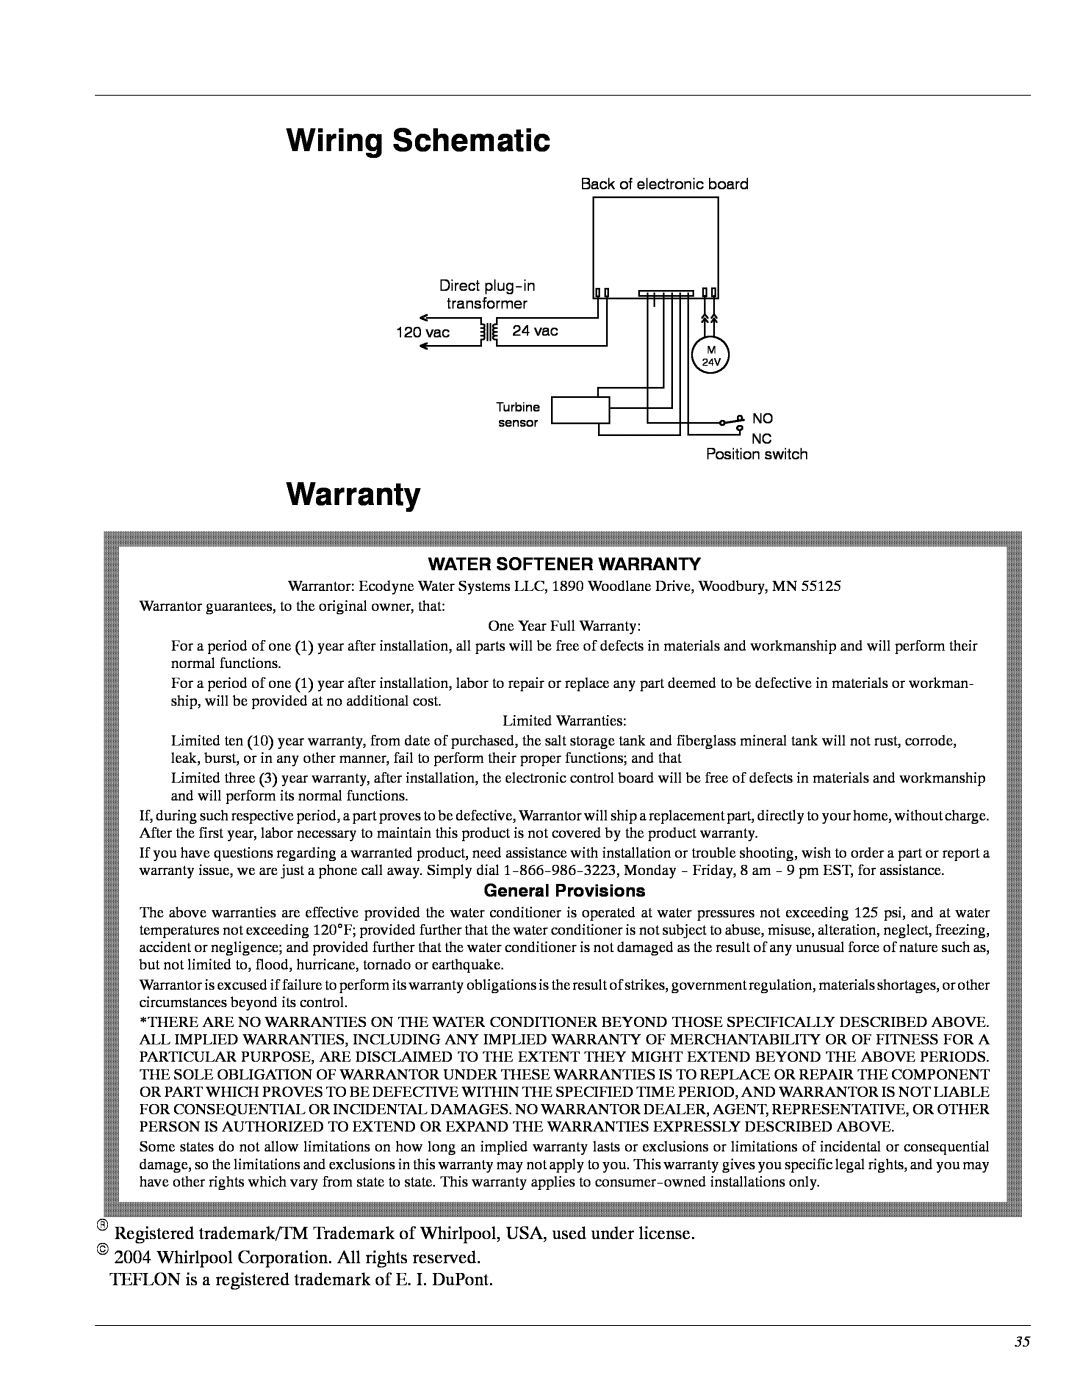 Whirlpool WHES20, WHES30 Wiring Schematic, TEFLON is a registered trademark of E. I. DuPont, Water Softener Warranty 